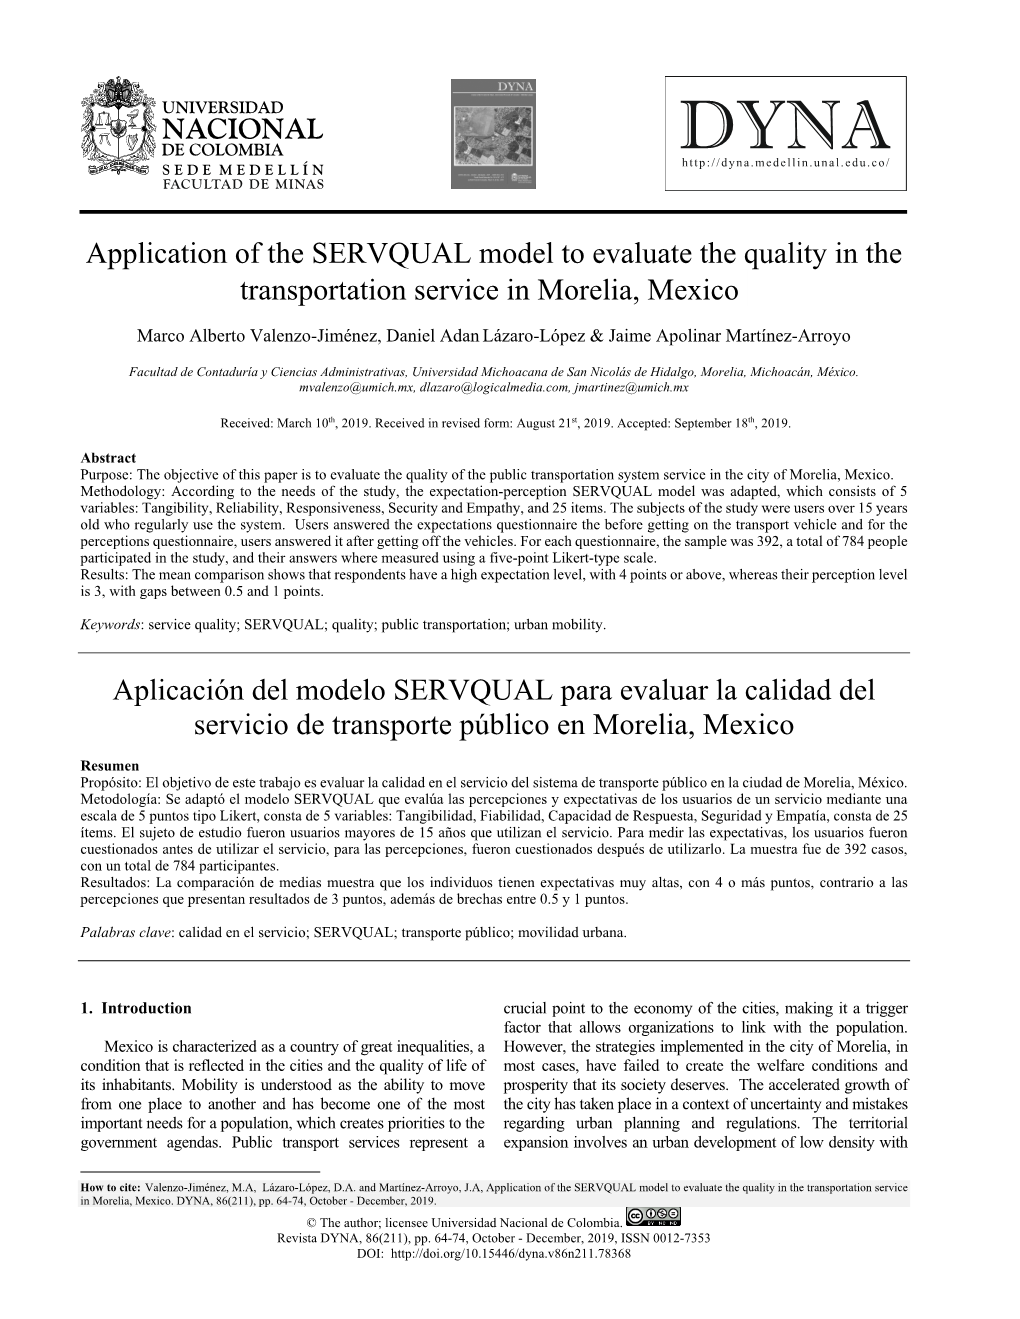 Application of the SERVQUAL Model to Evaluate the Quality in the Transportation Service in Morelia, Mexico•